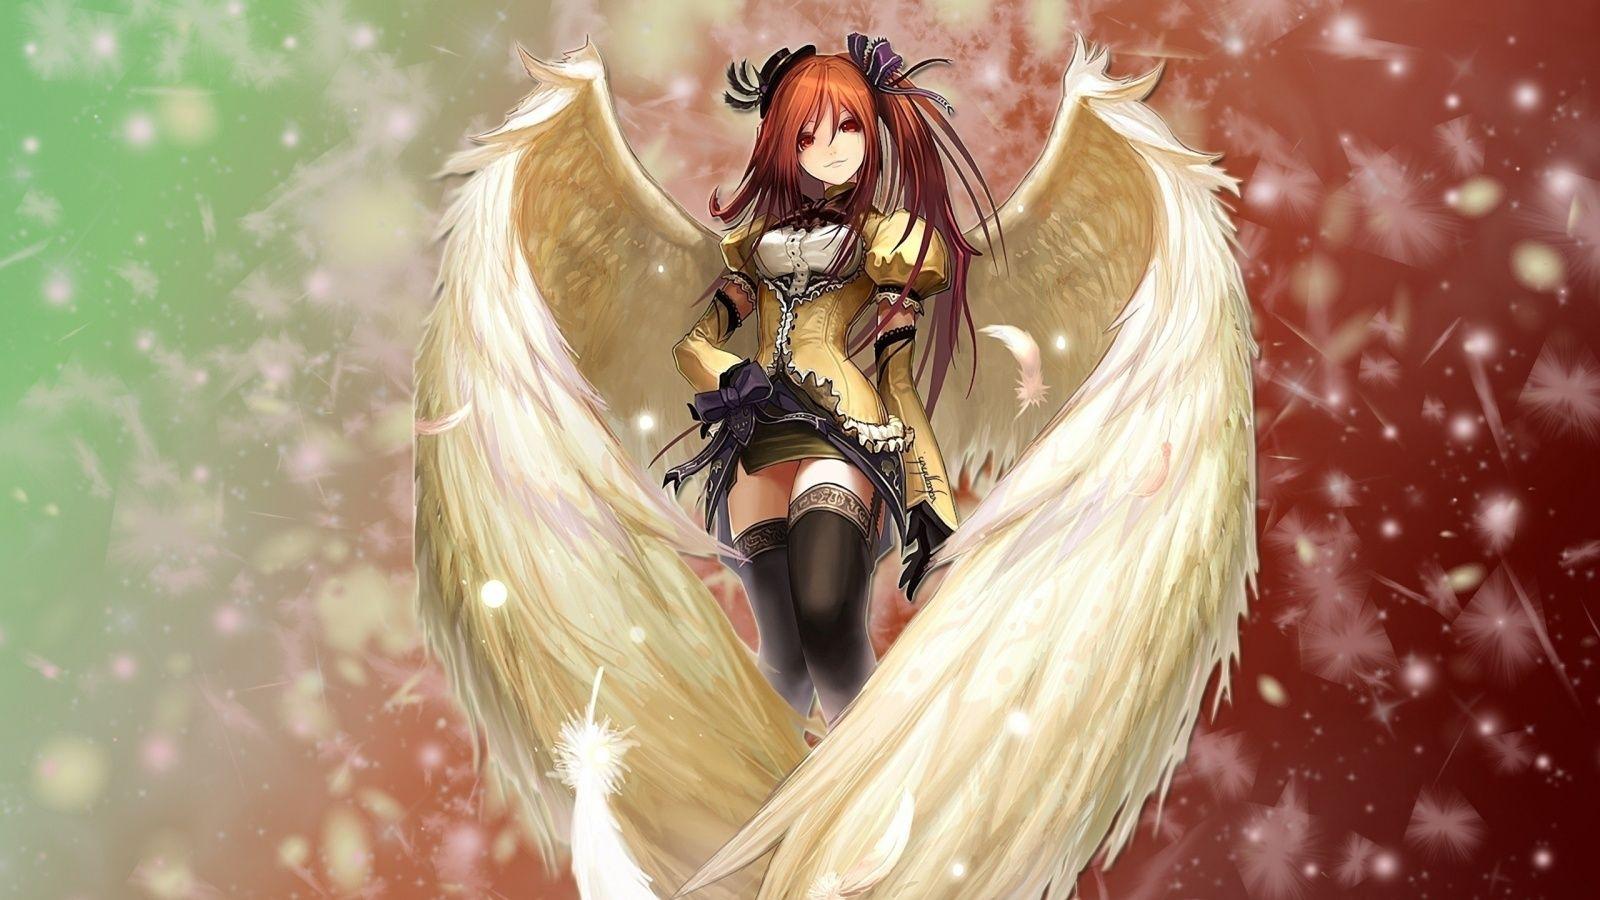 Anime Angels. Hot Anime Angel x 900. Download. Close